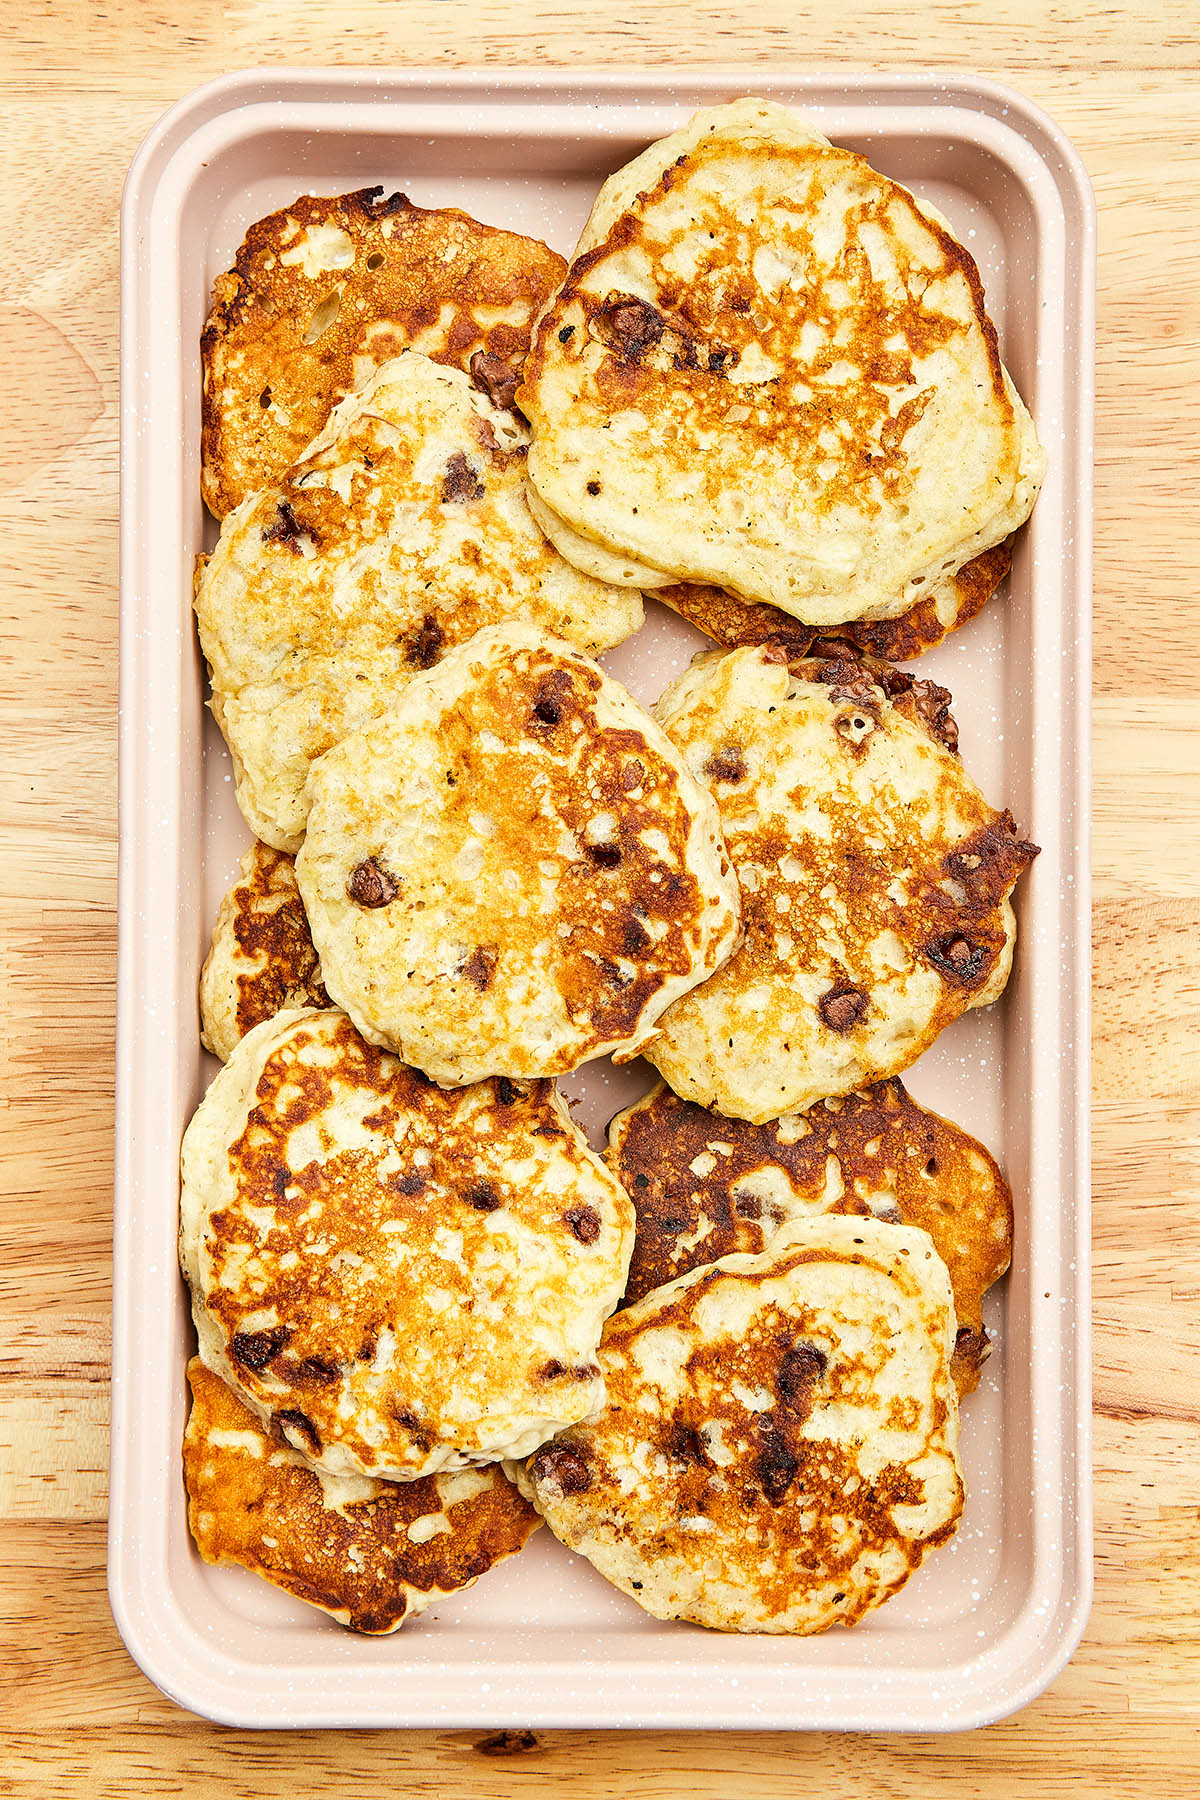 Overhead image of a baking tray filled with banana chocolate chip pancakes.